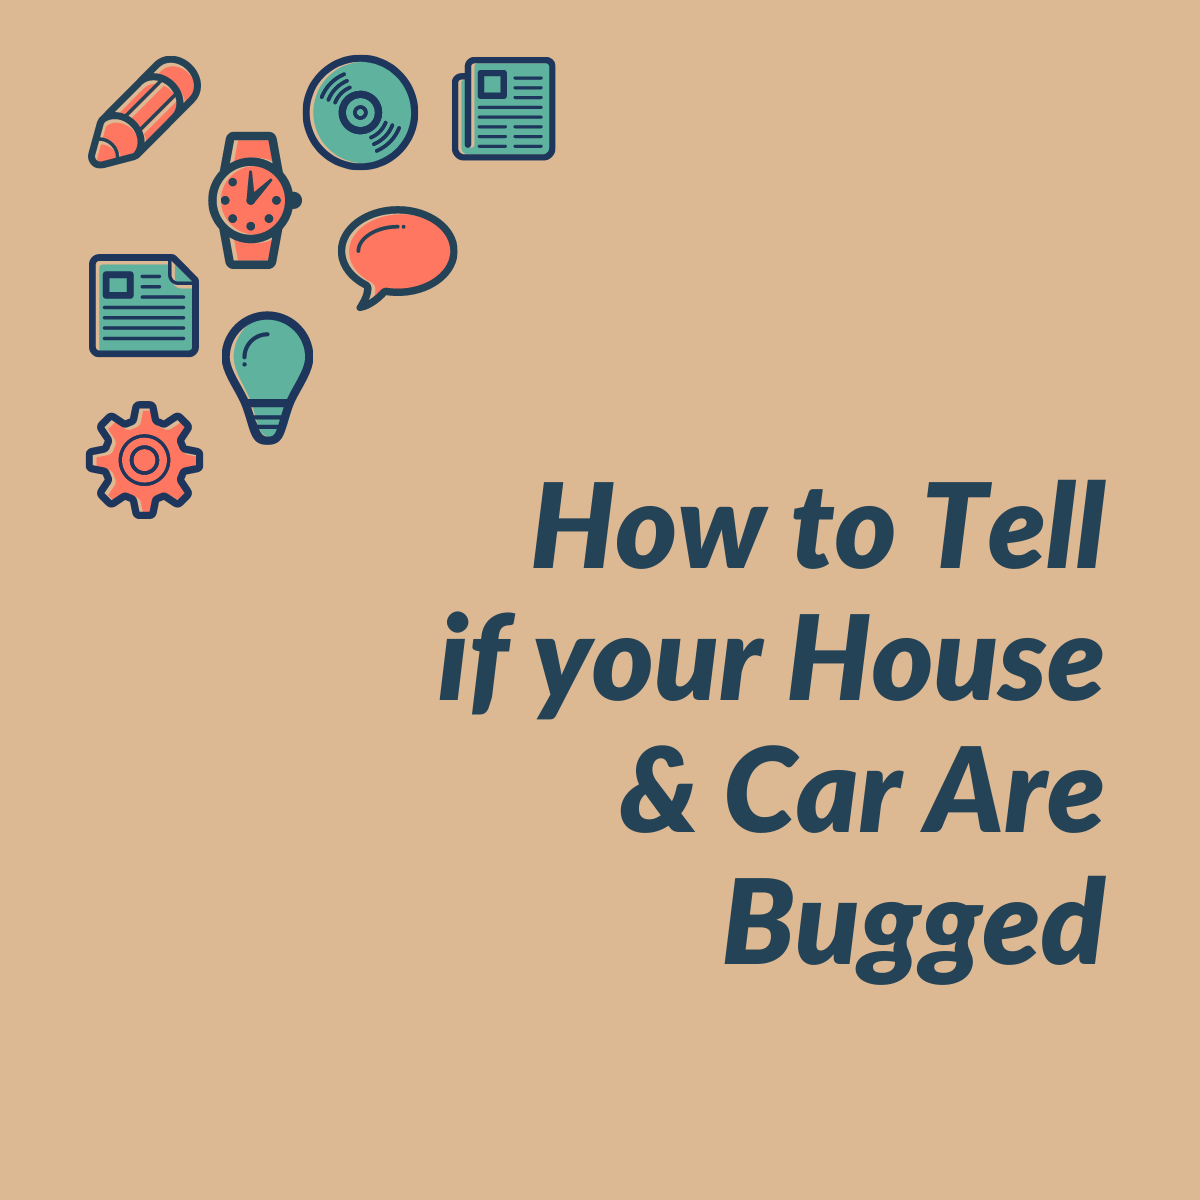 How to Tell If Your House & Car Are Bugged